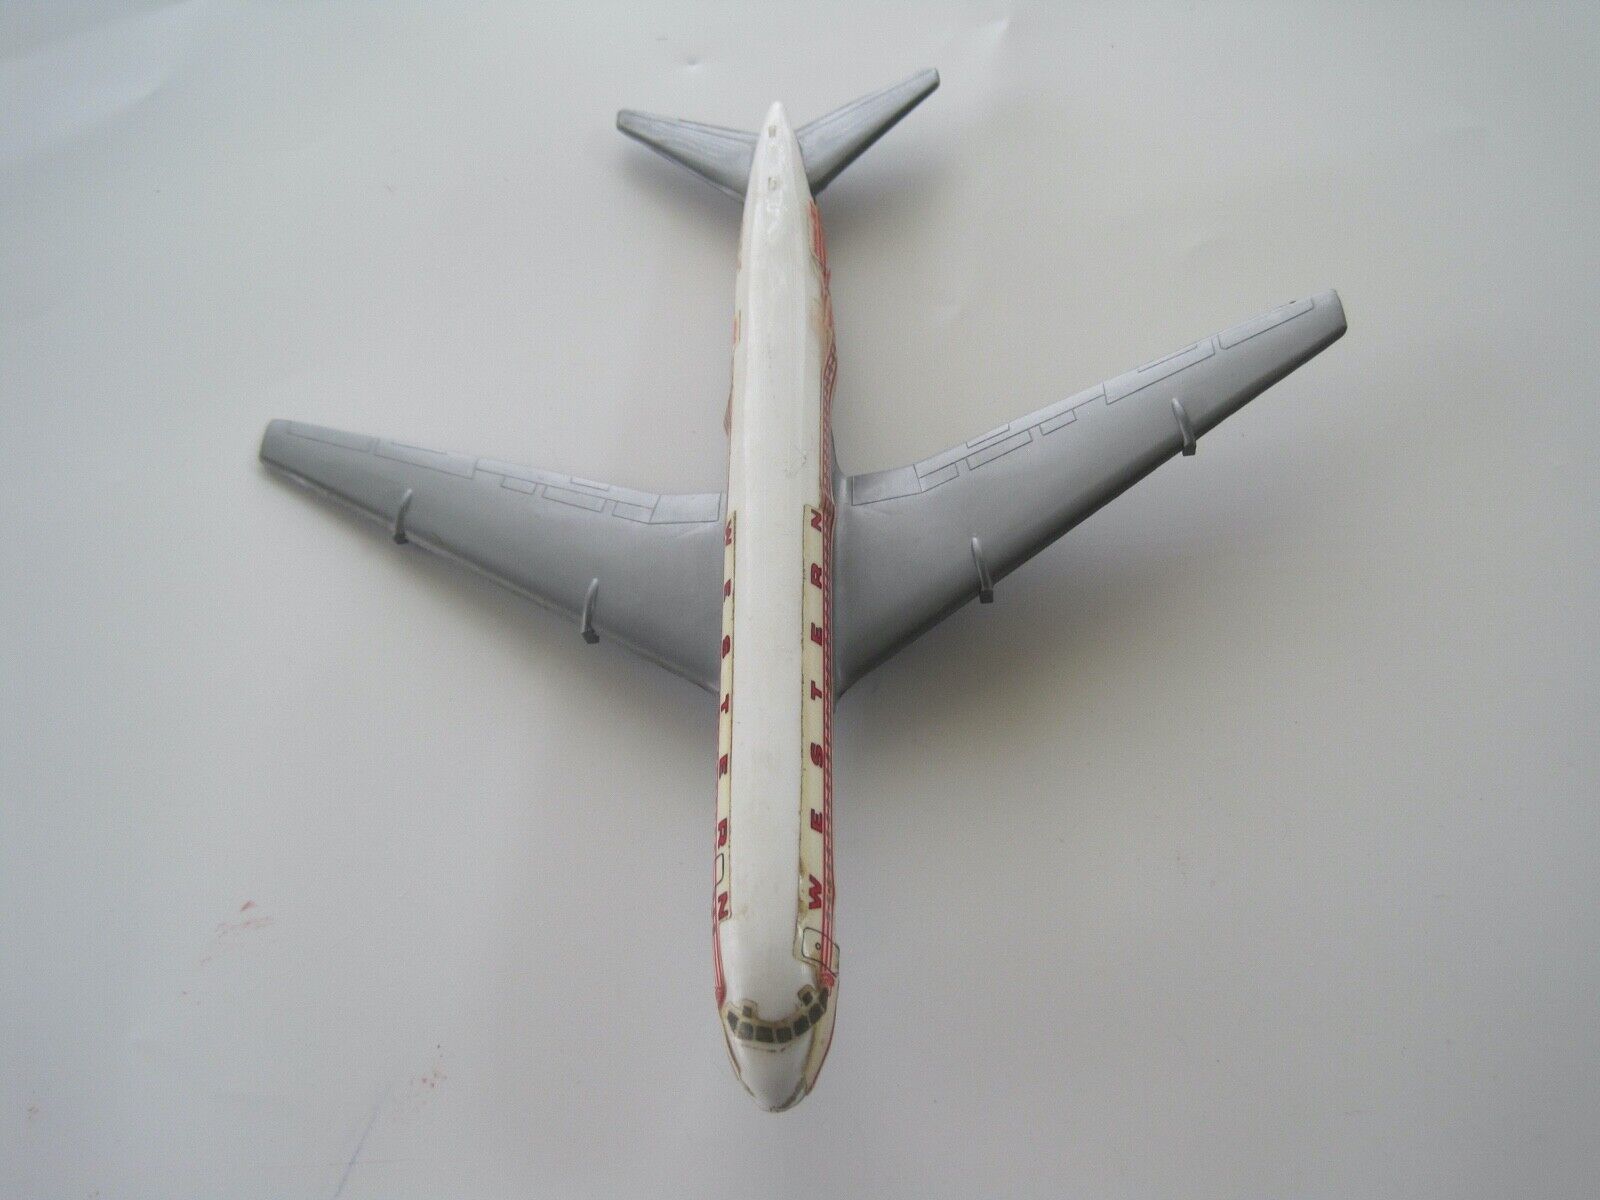 Western Airlines Plastic Plane